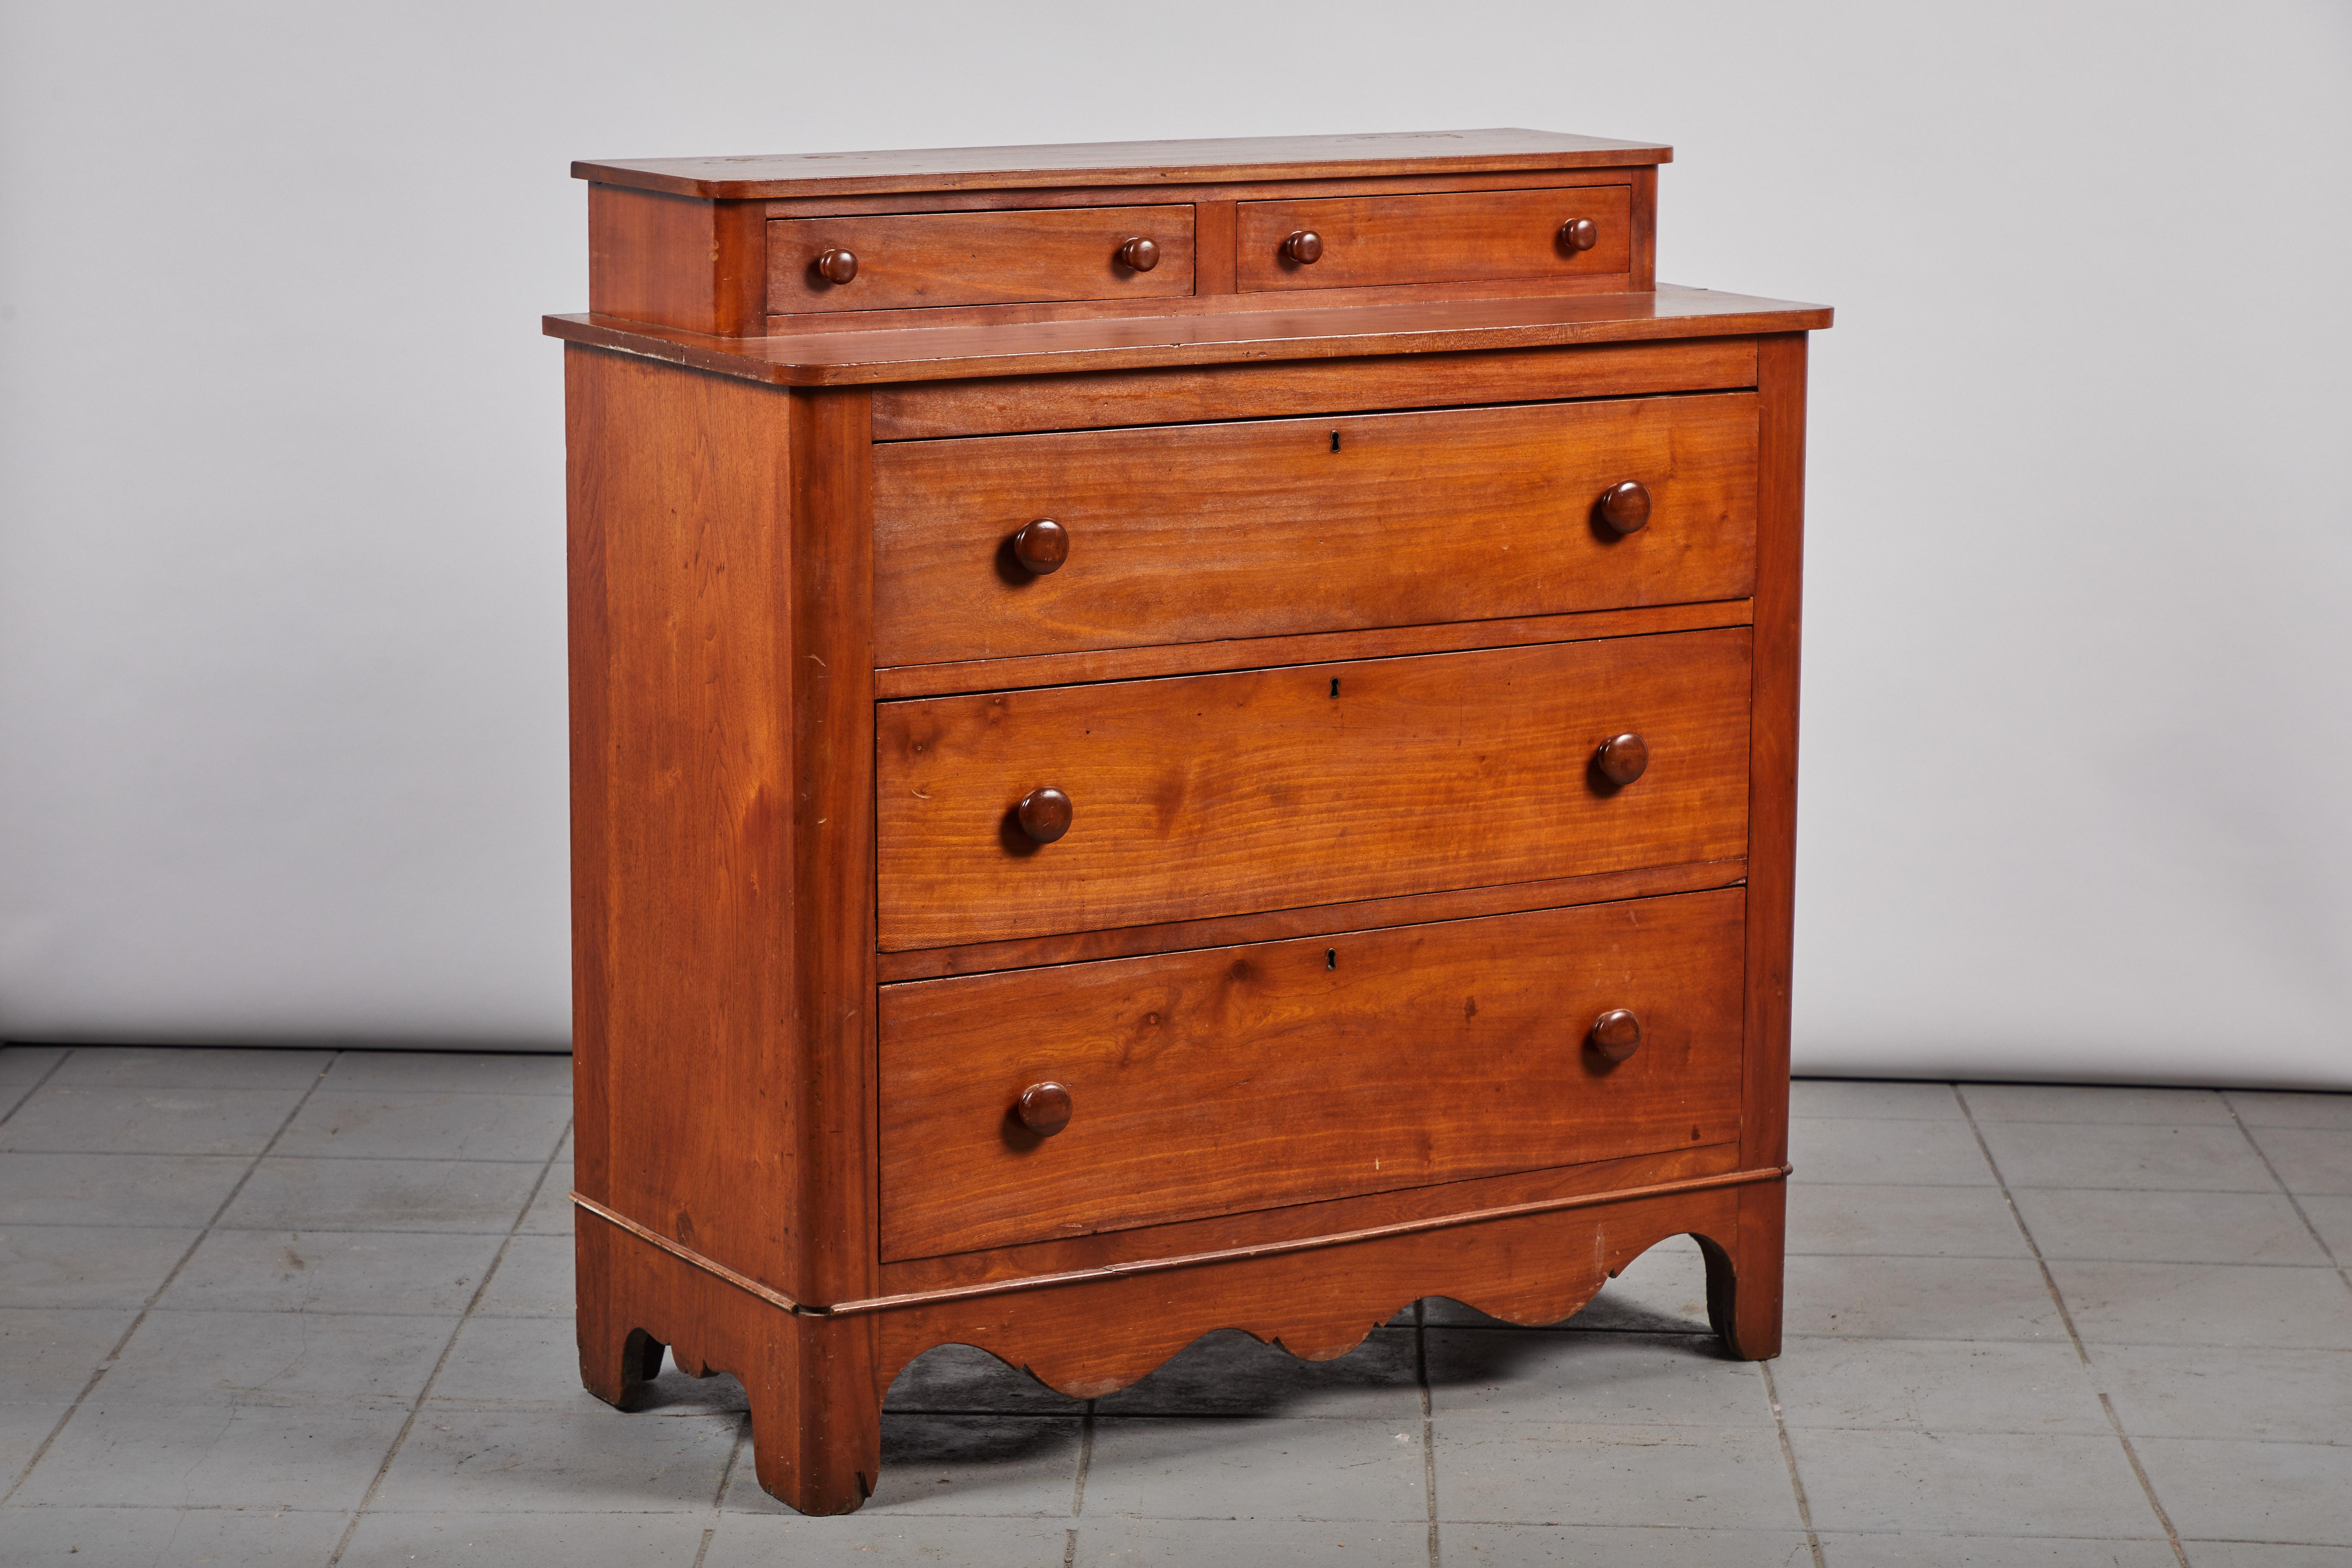 20th Century Early American Five-Drawer Dresser